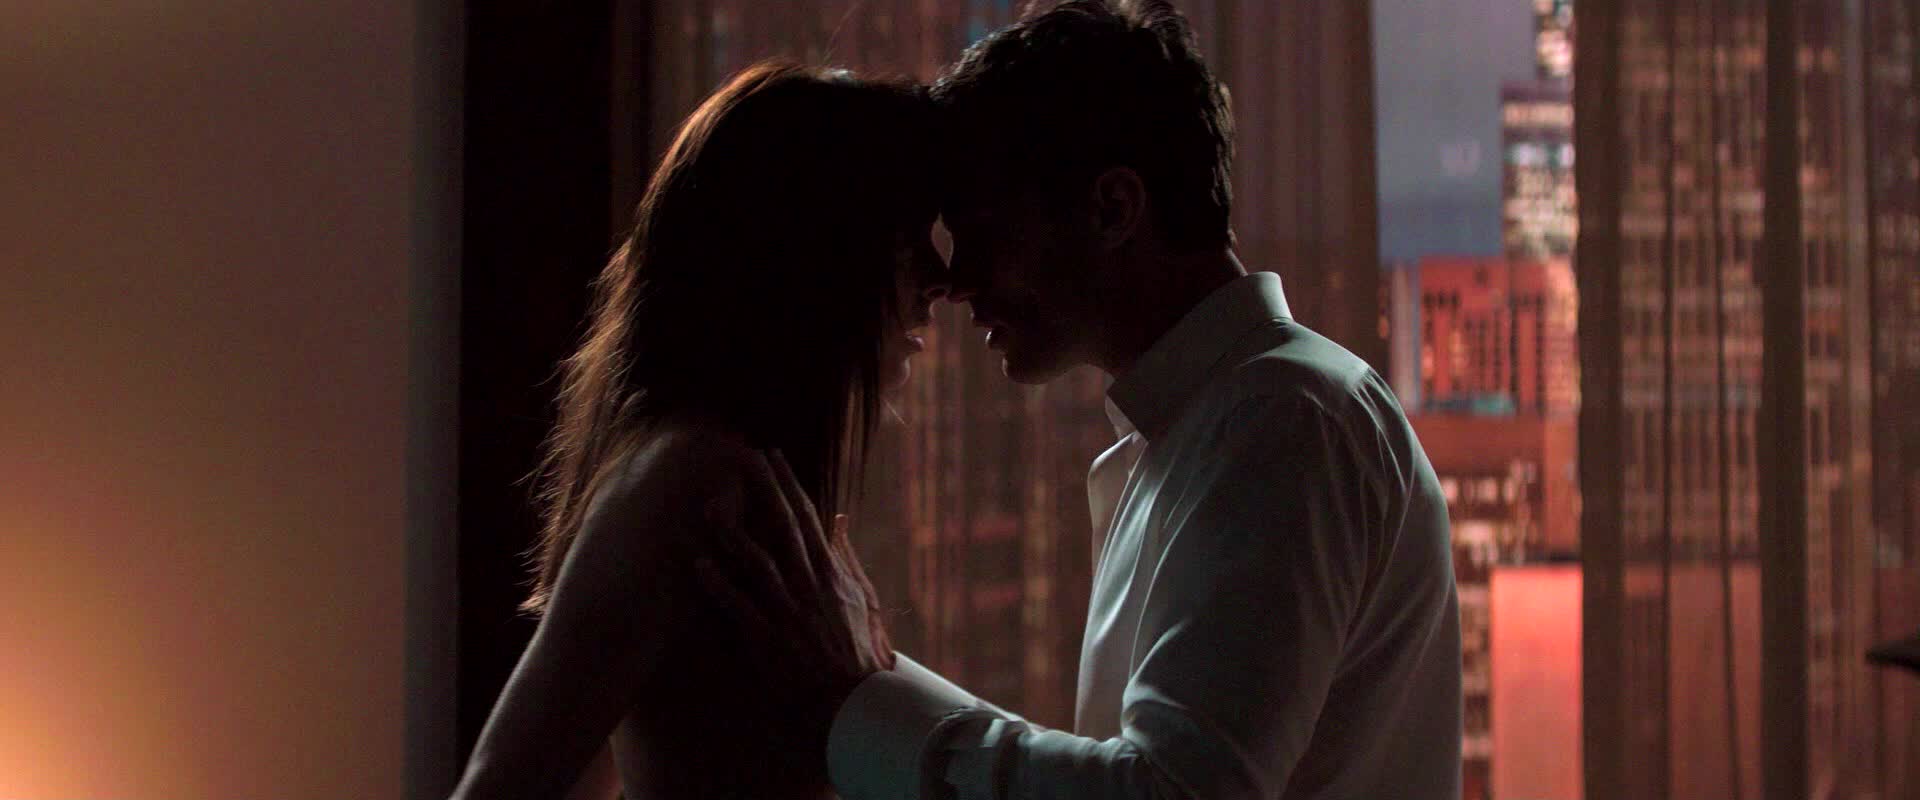 Fifty shades sex scenes gifs